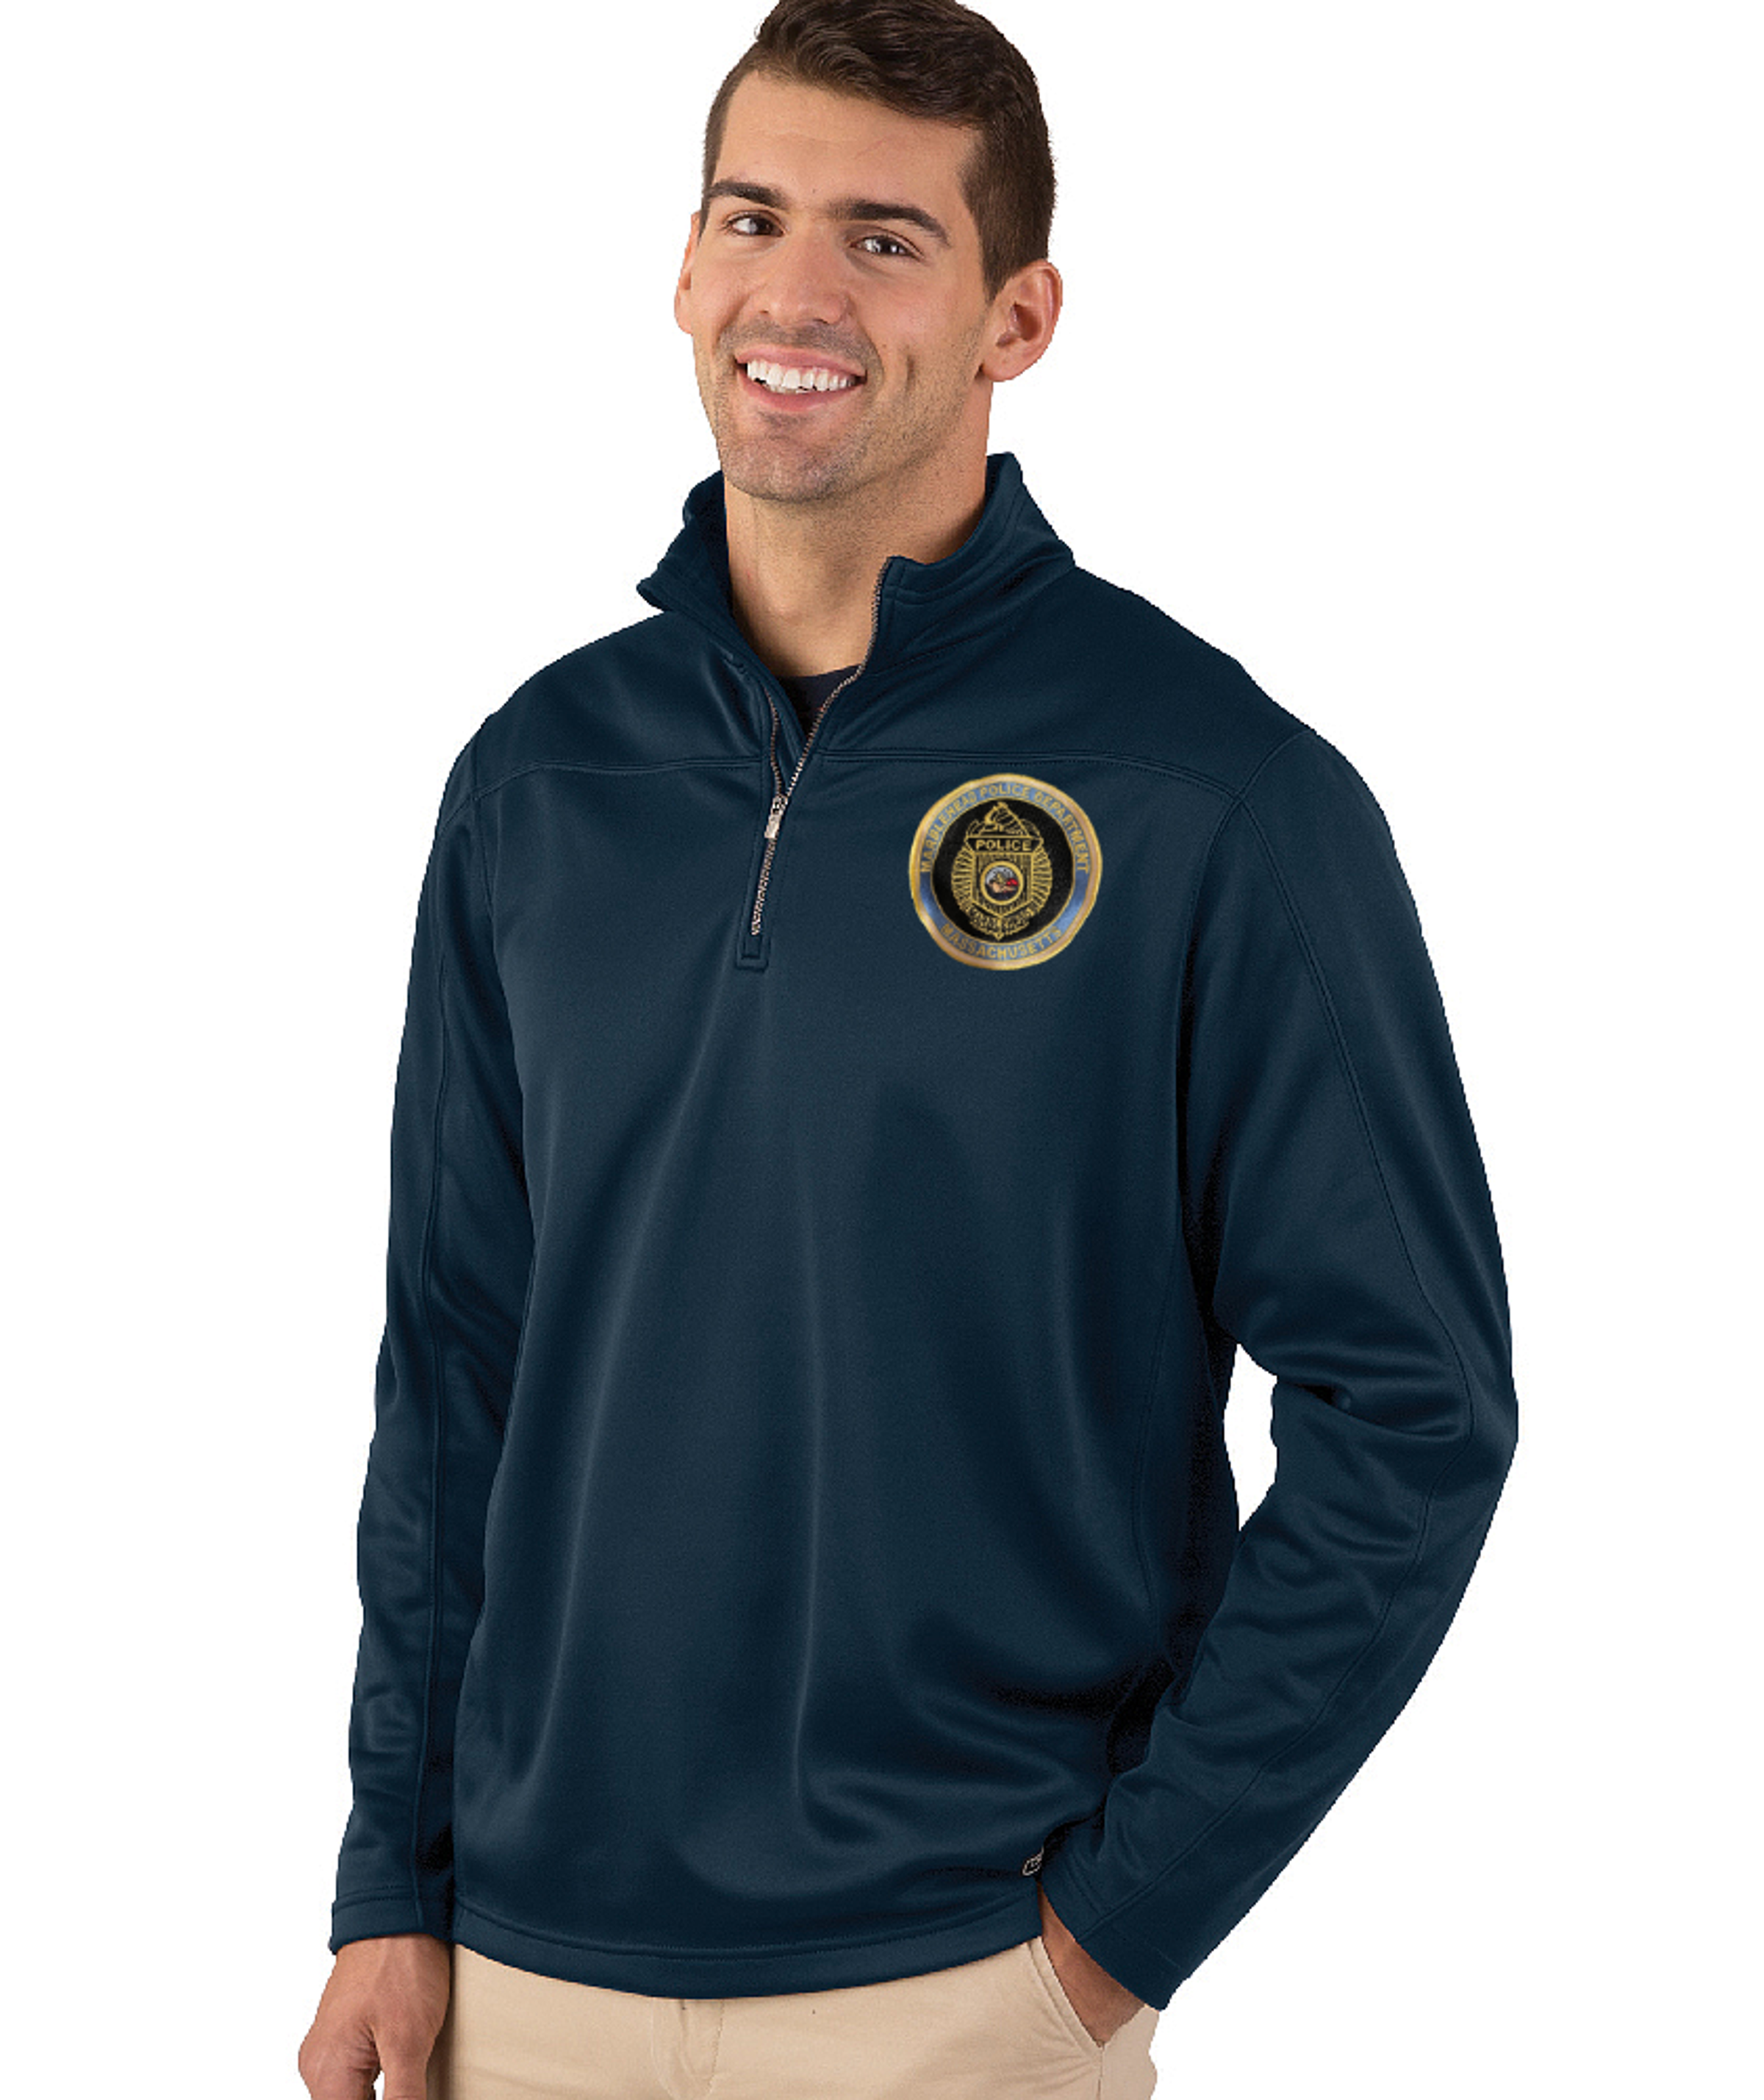 Marblehead Police Stealth Zip Pullover